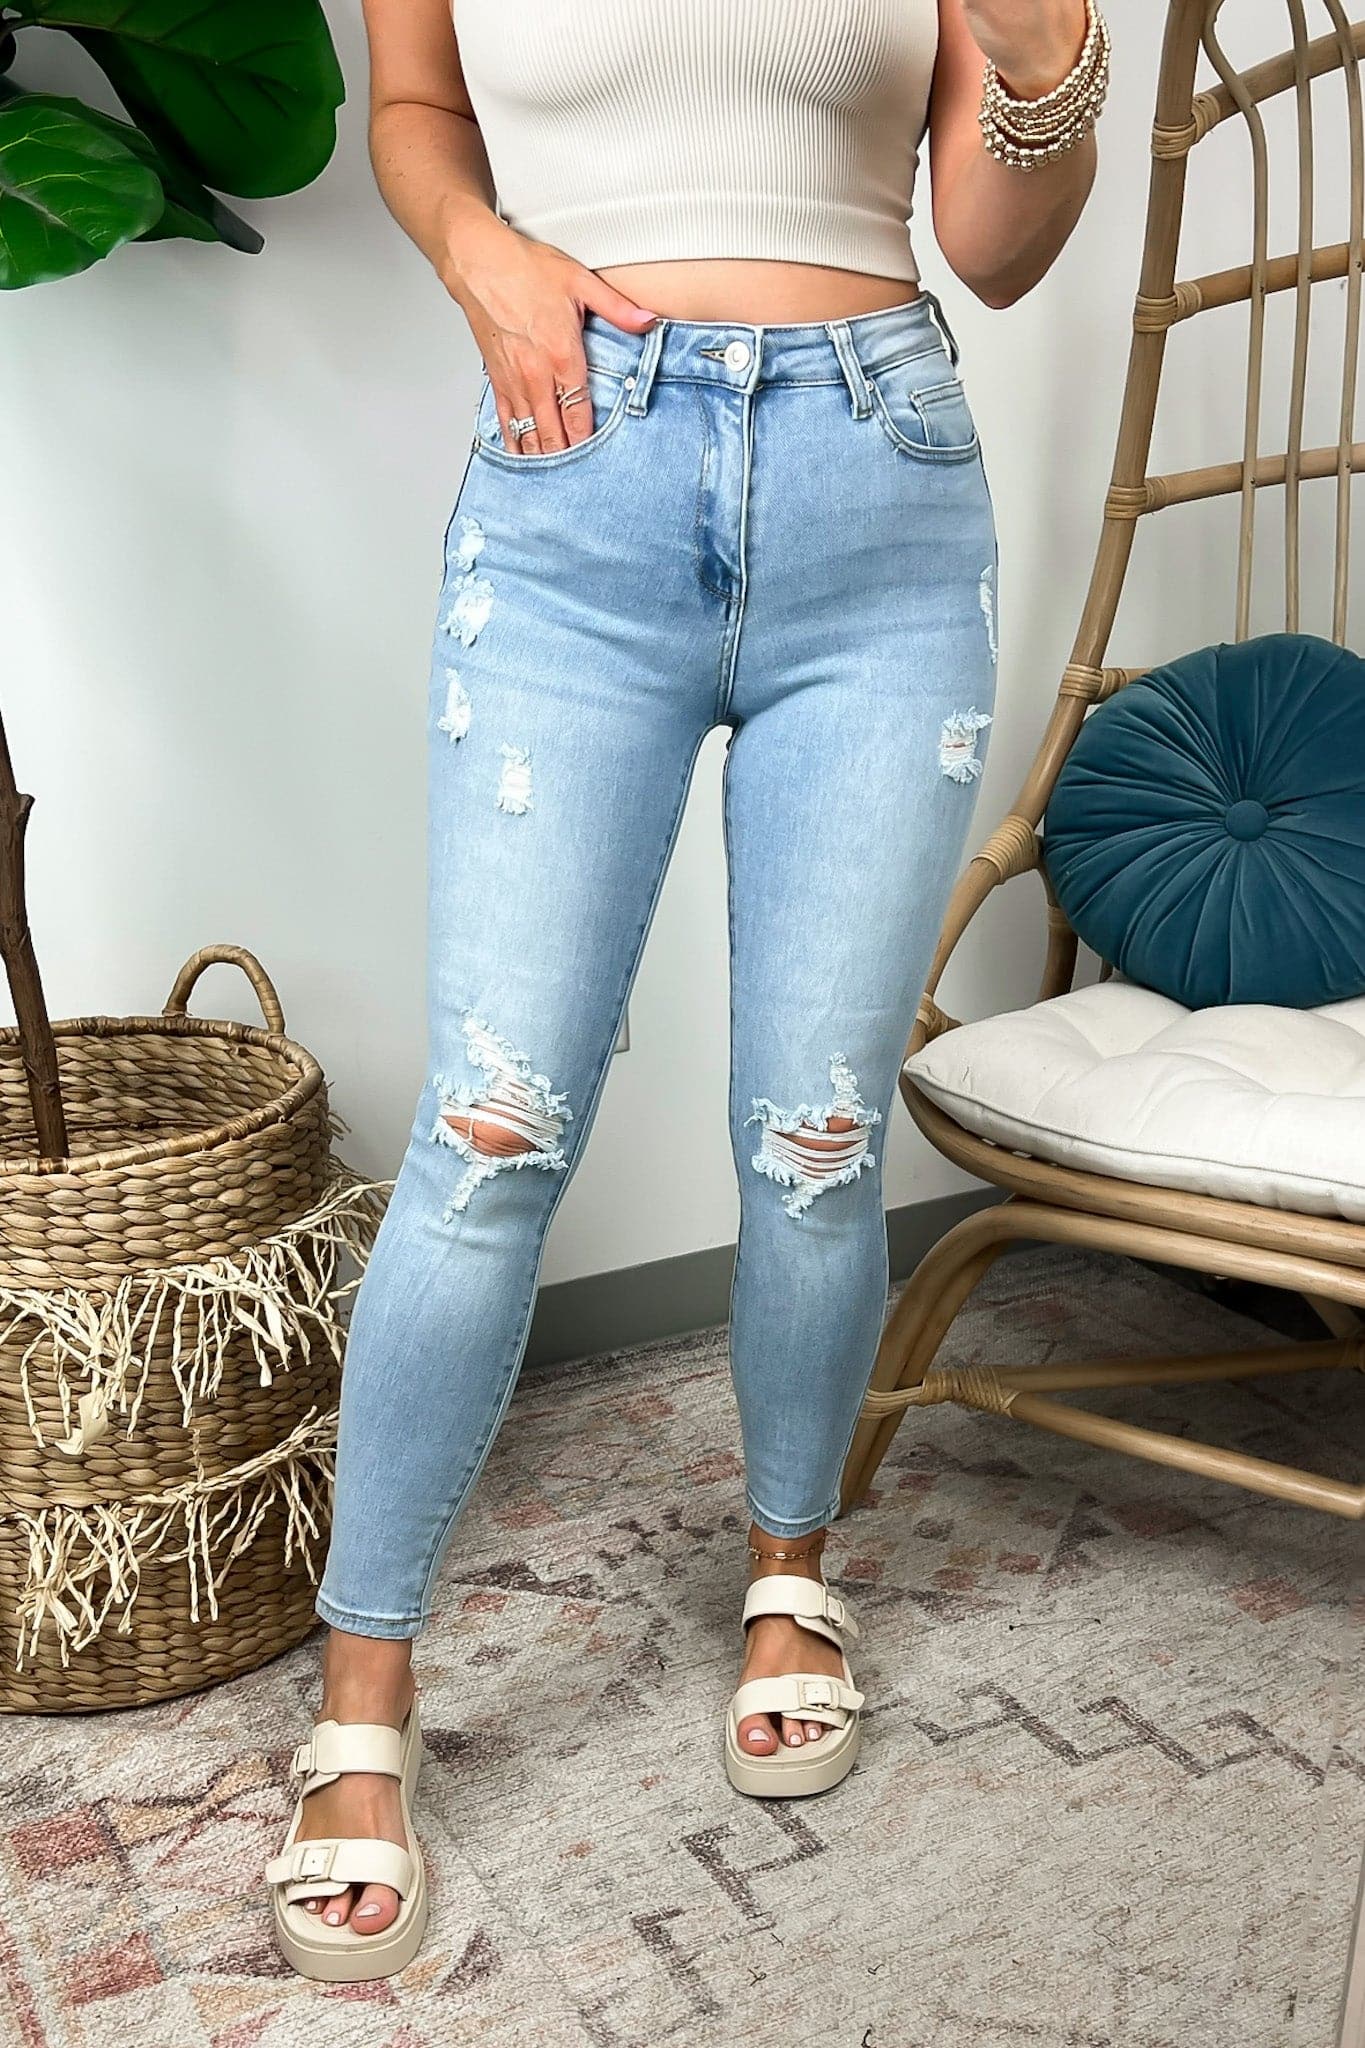  Confident Charisma Vintage Push-Up High Rise Skinny Jeans - FINAL SALE - Madison and Mallory